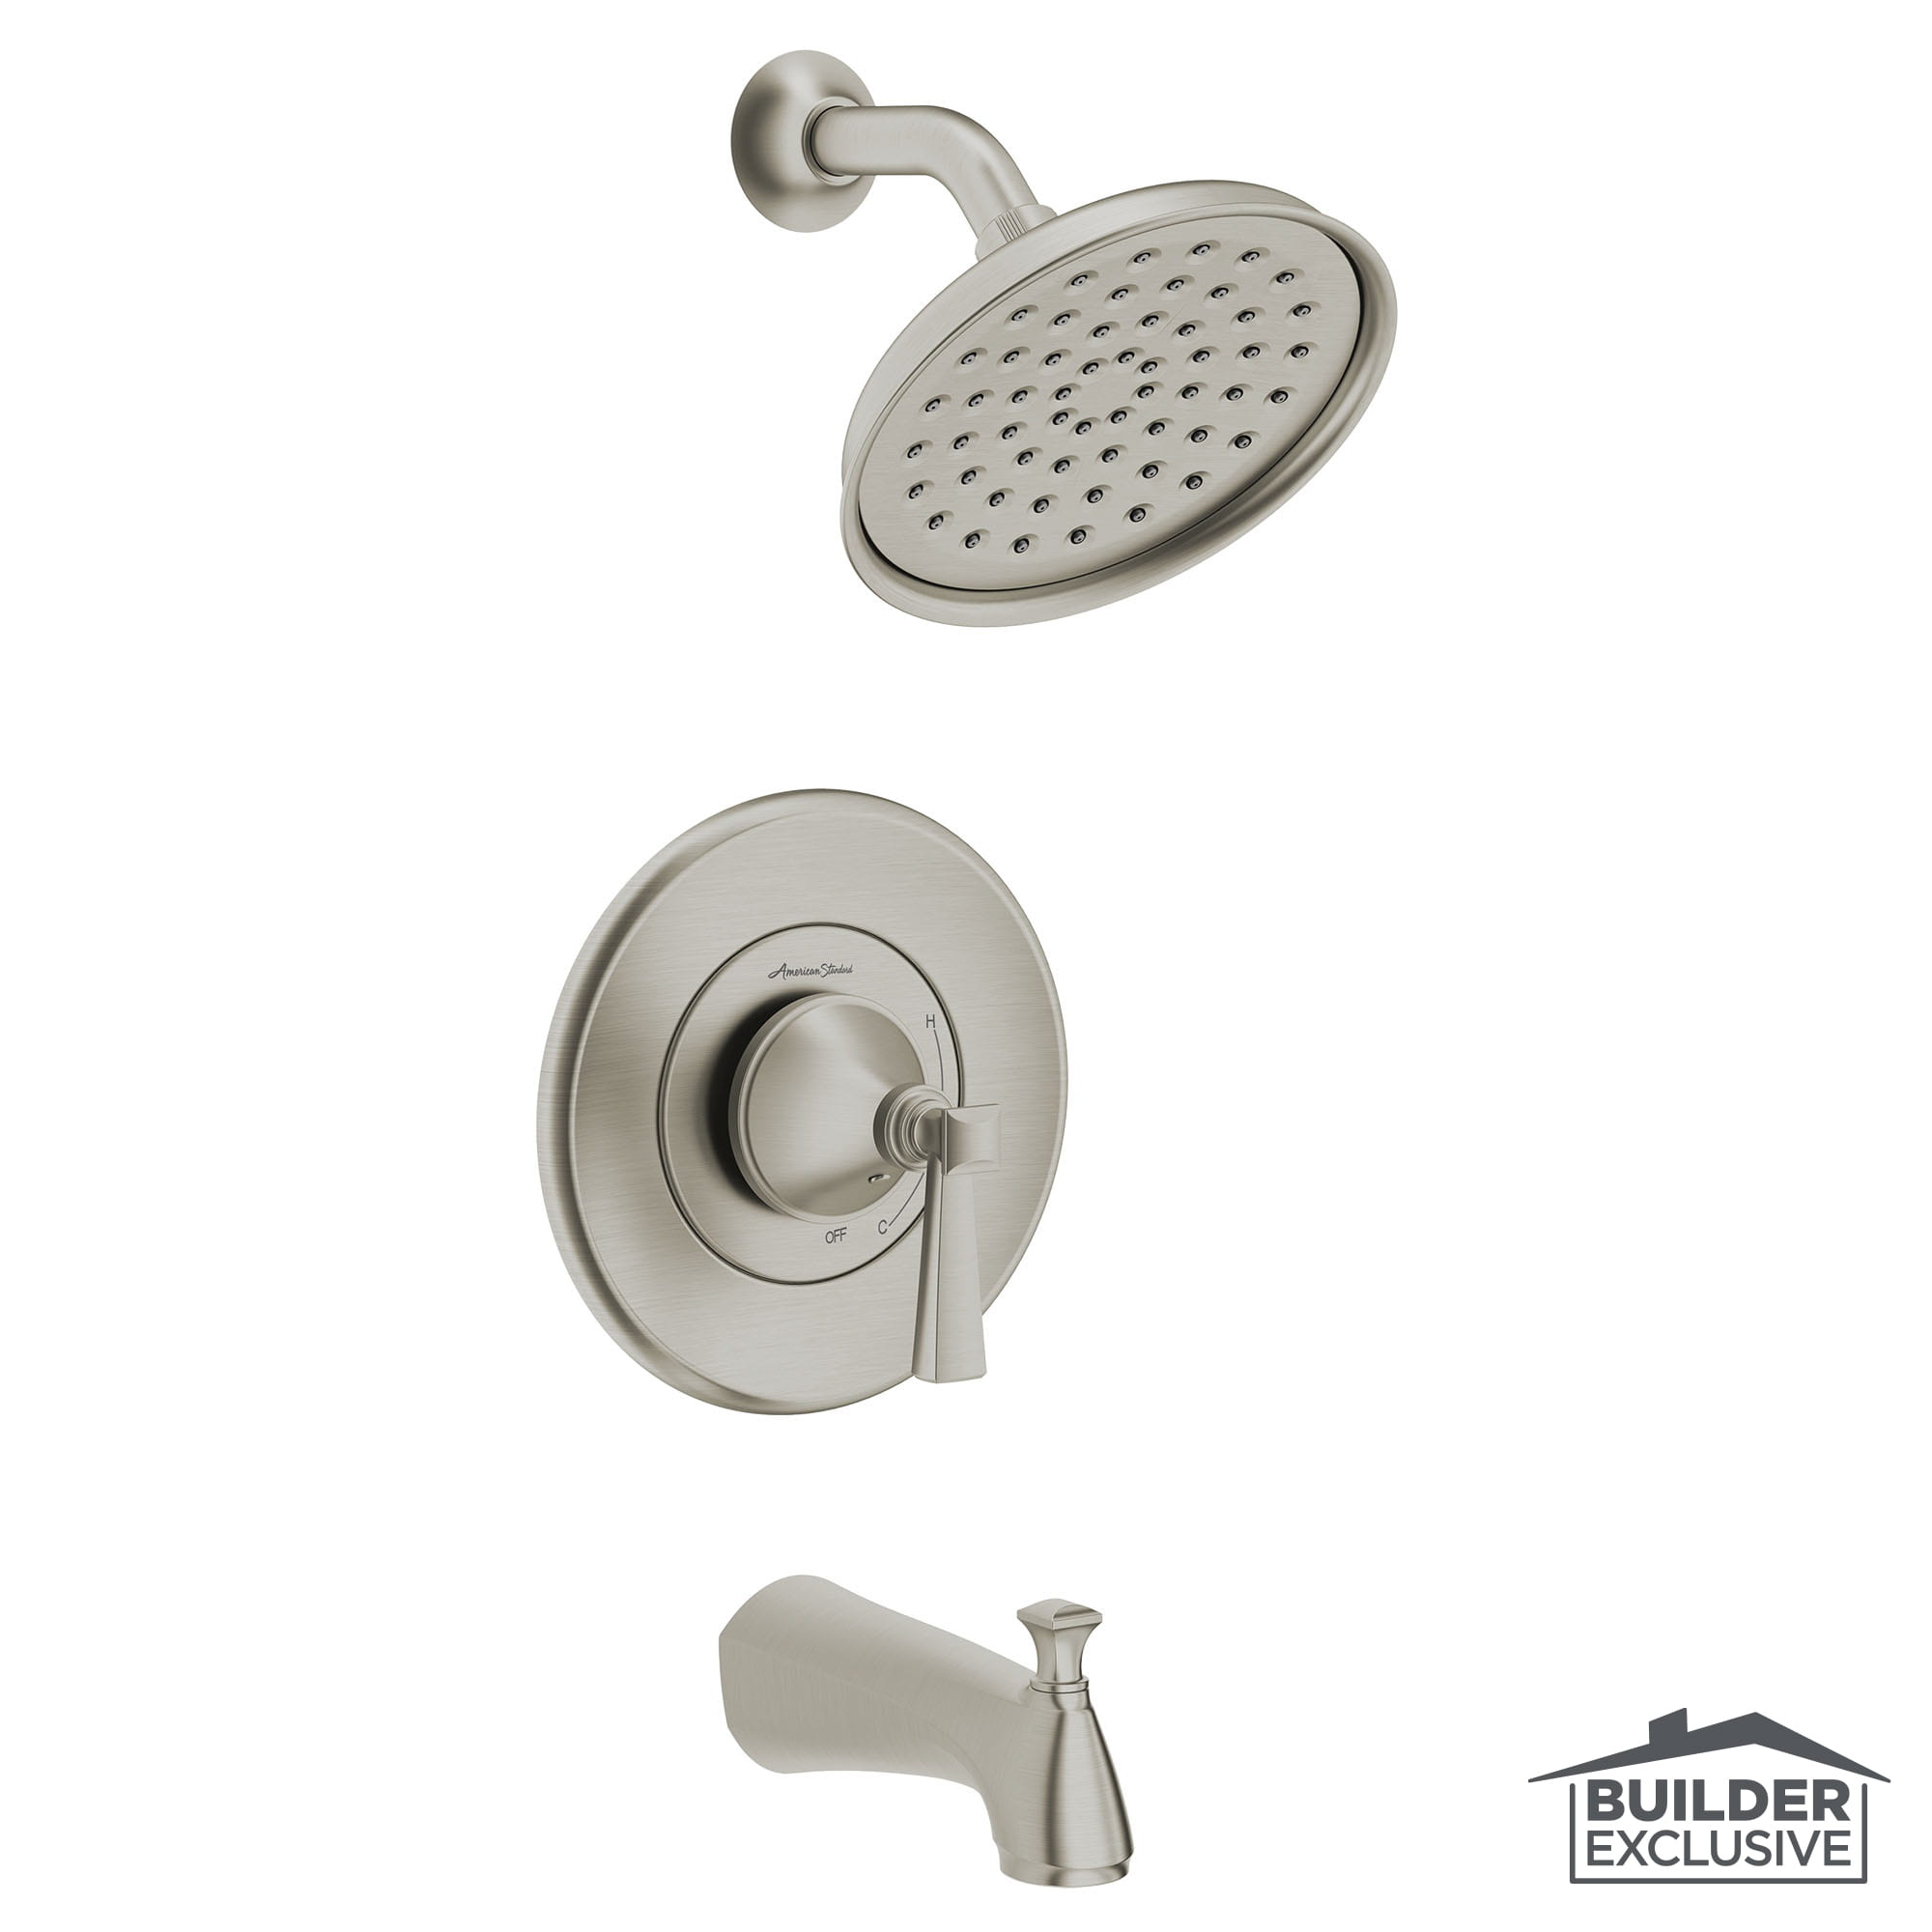 Glenmere Tub and Shower Trim Kit with Pressure Balance Valve Cartridge 18 gpm BRUSHED NICKEL